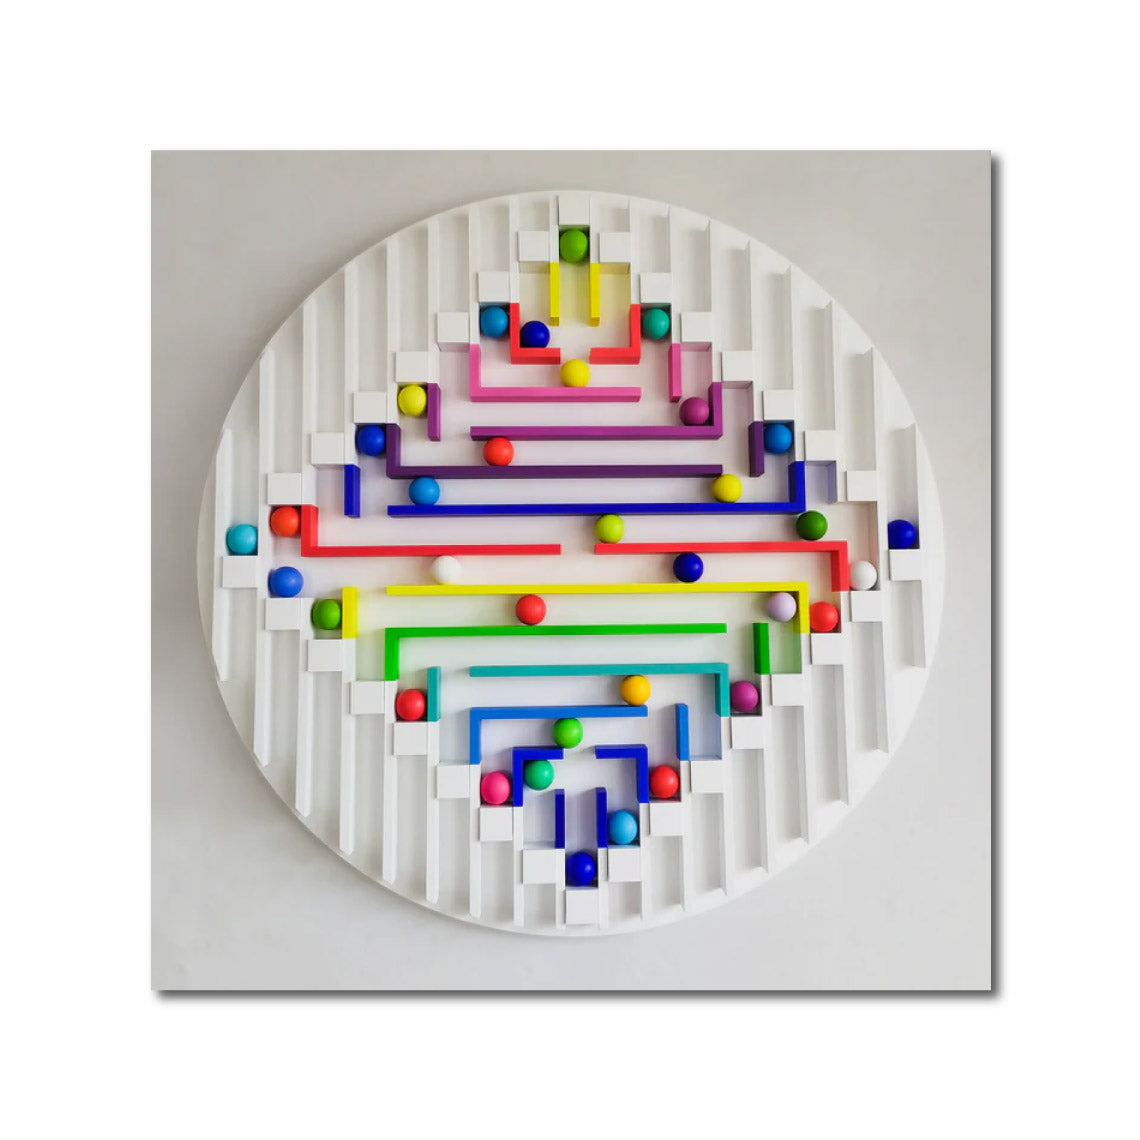 'COLORFUL LABYRINTHS IN CIRCLE SCULPTURE'